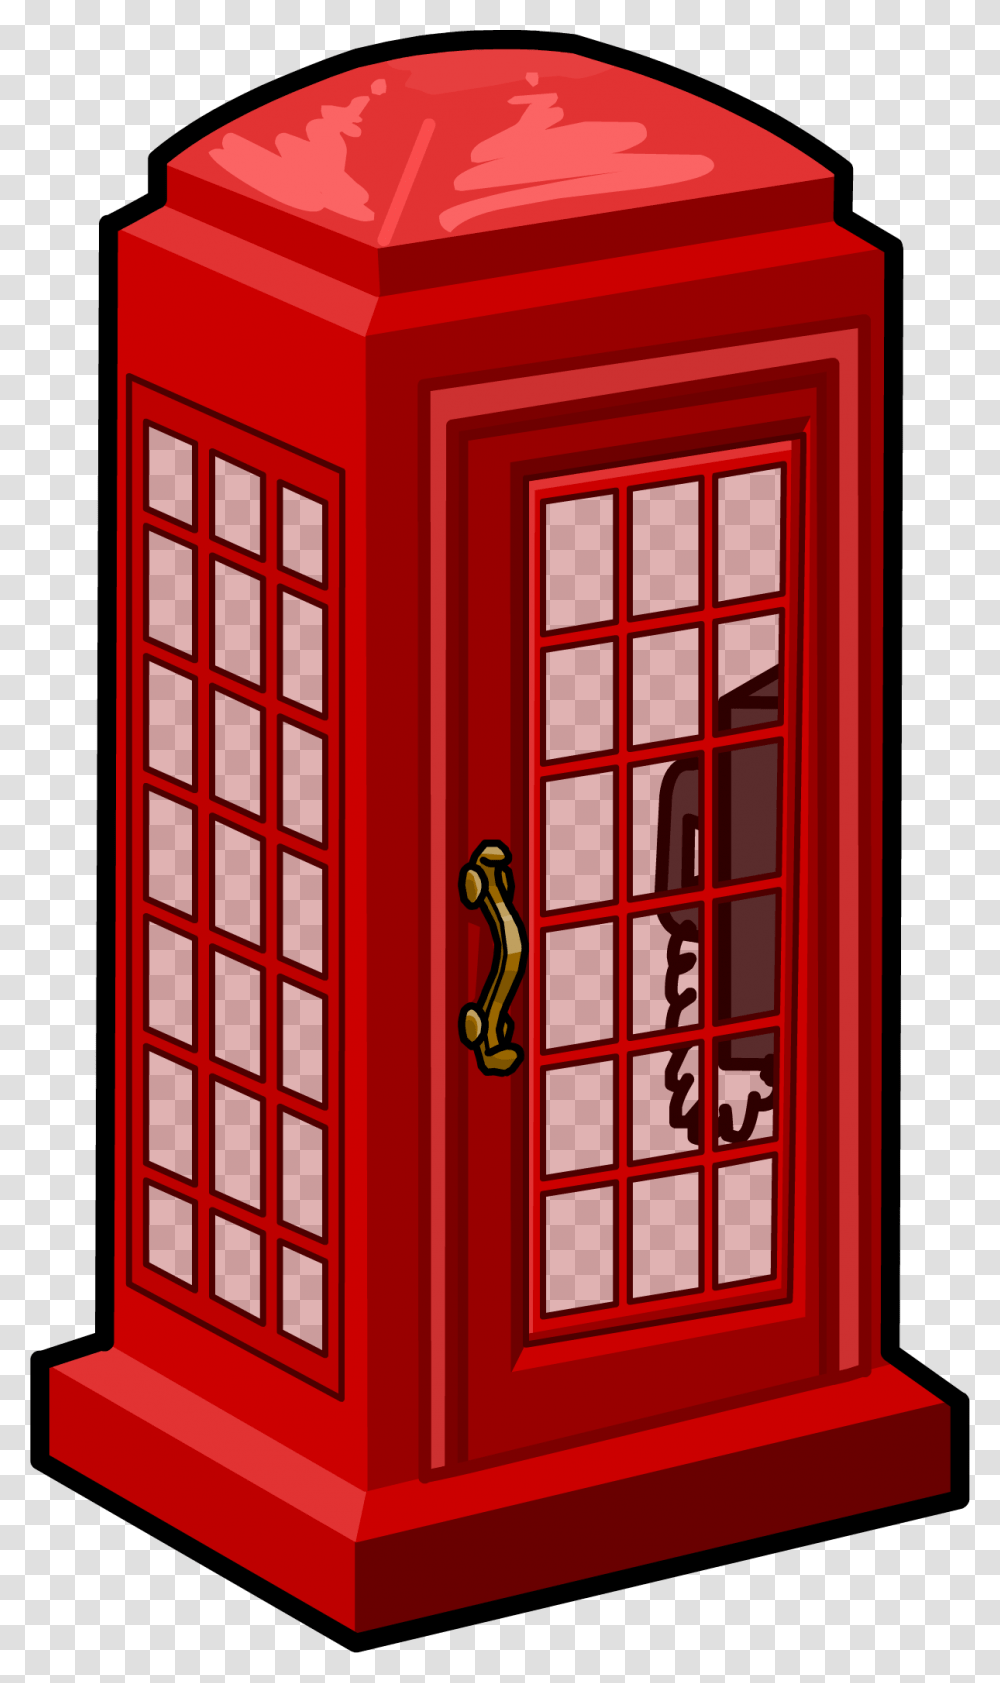 Phone Booth Image Purepng Free Cc0 Telephone Booth Clipart, Mailbox, Letterbox, Kiosk Transparent Png